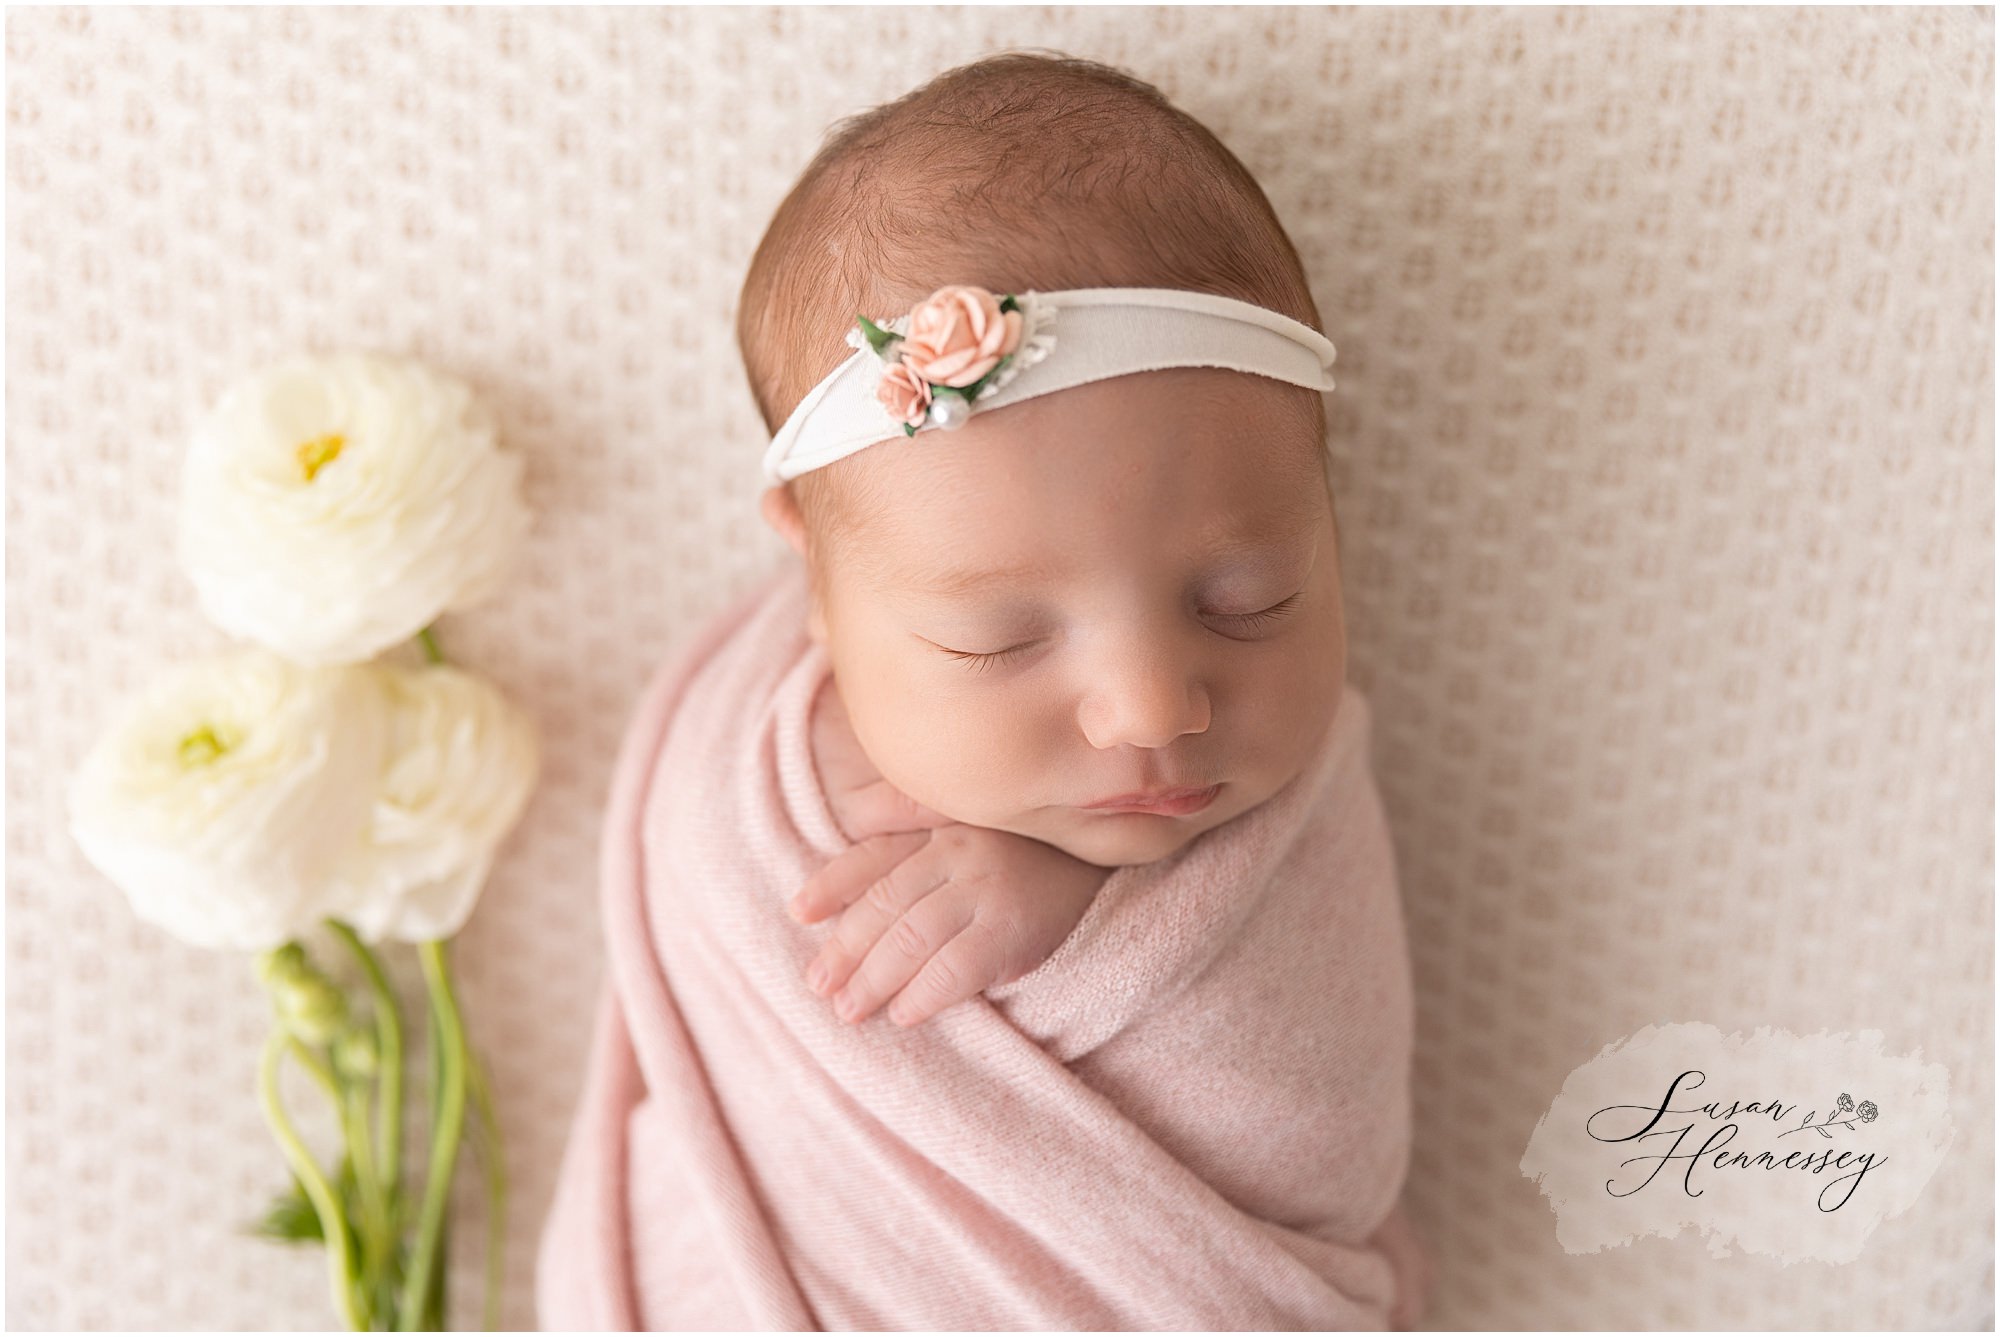 classic newborn photography with a neutral color palette